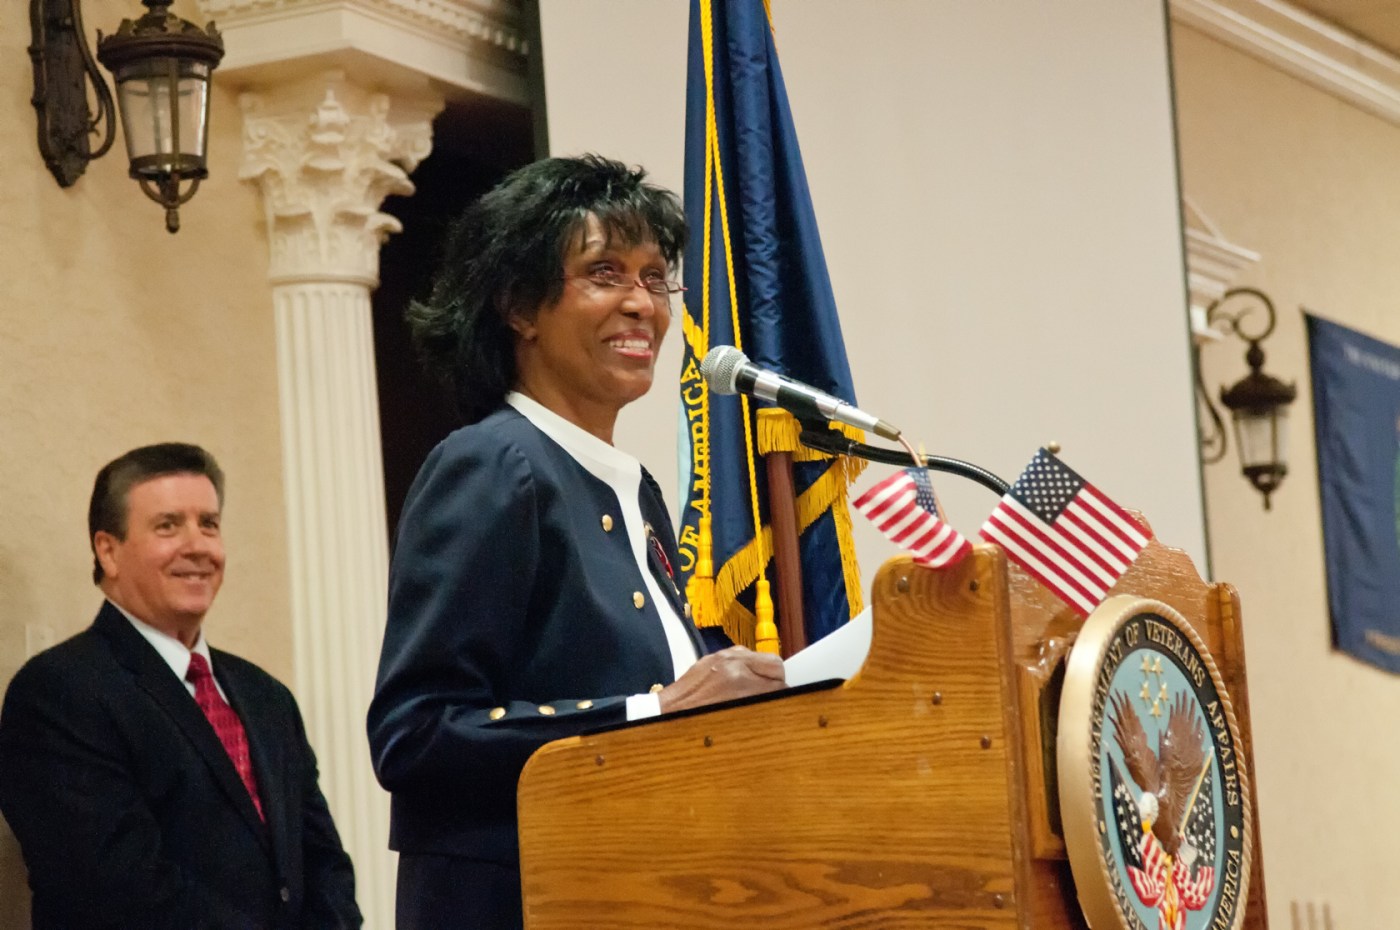 Veteran Joan Craigwell speaks at a commemorative event in 2016.